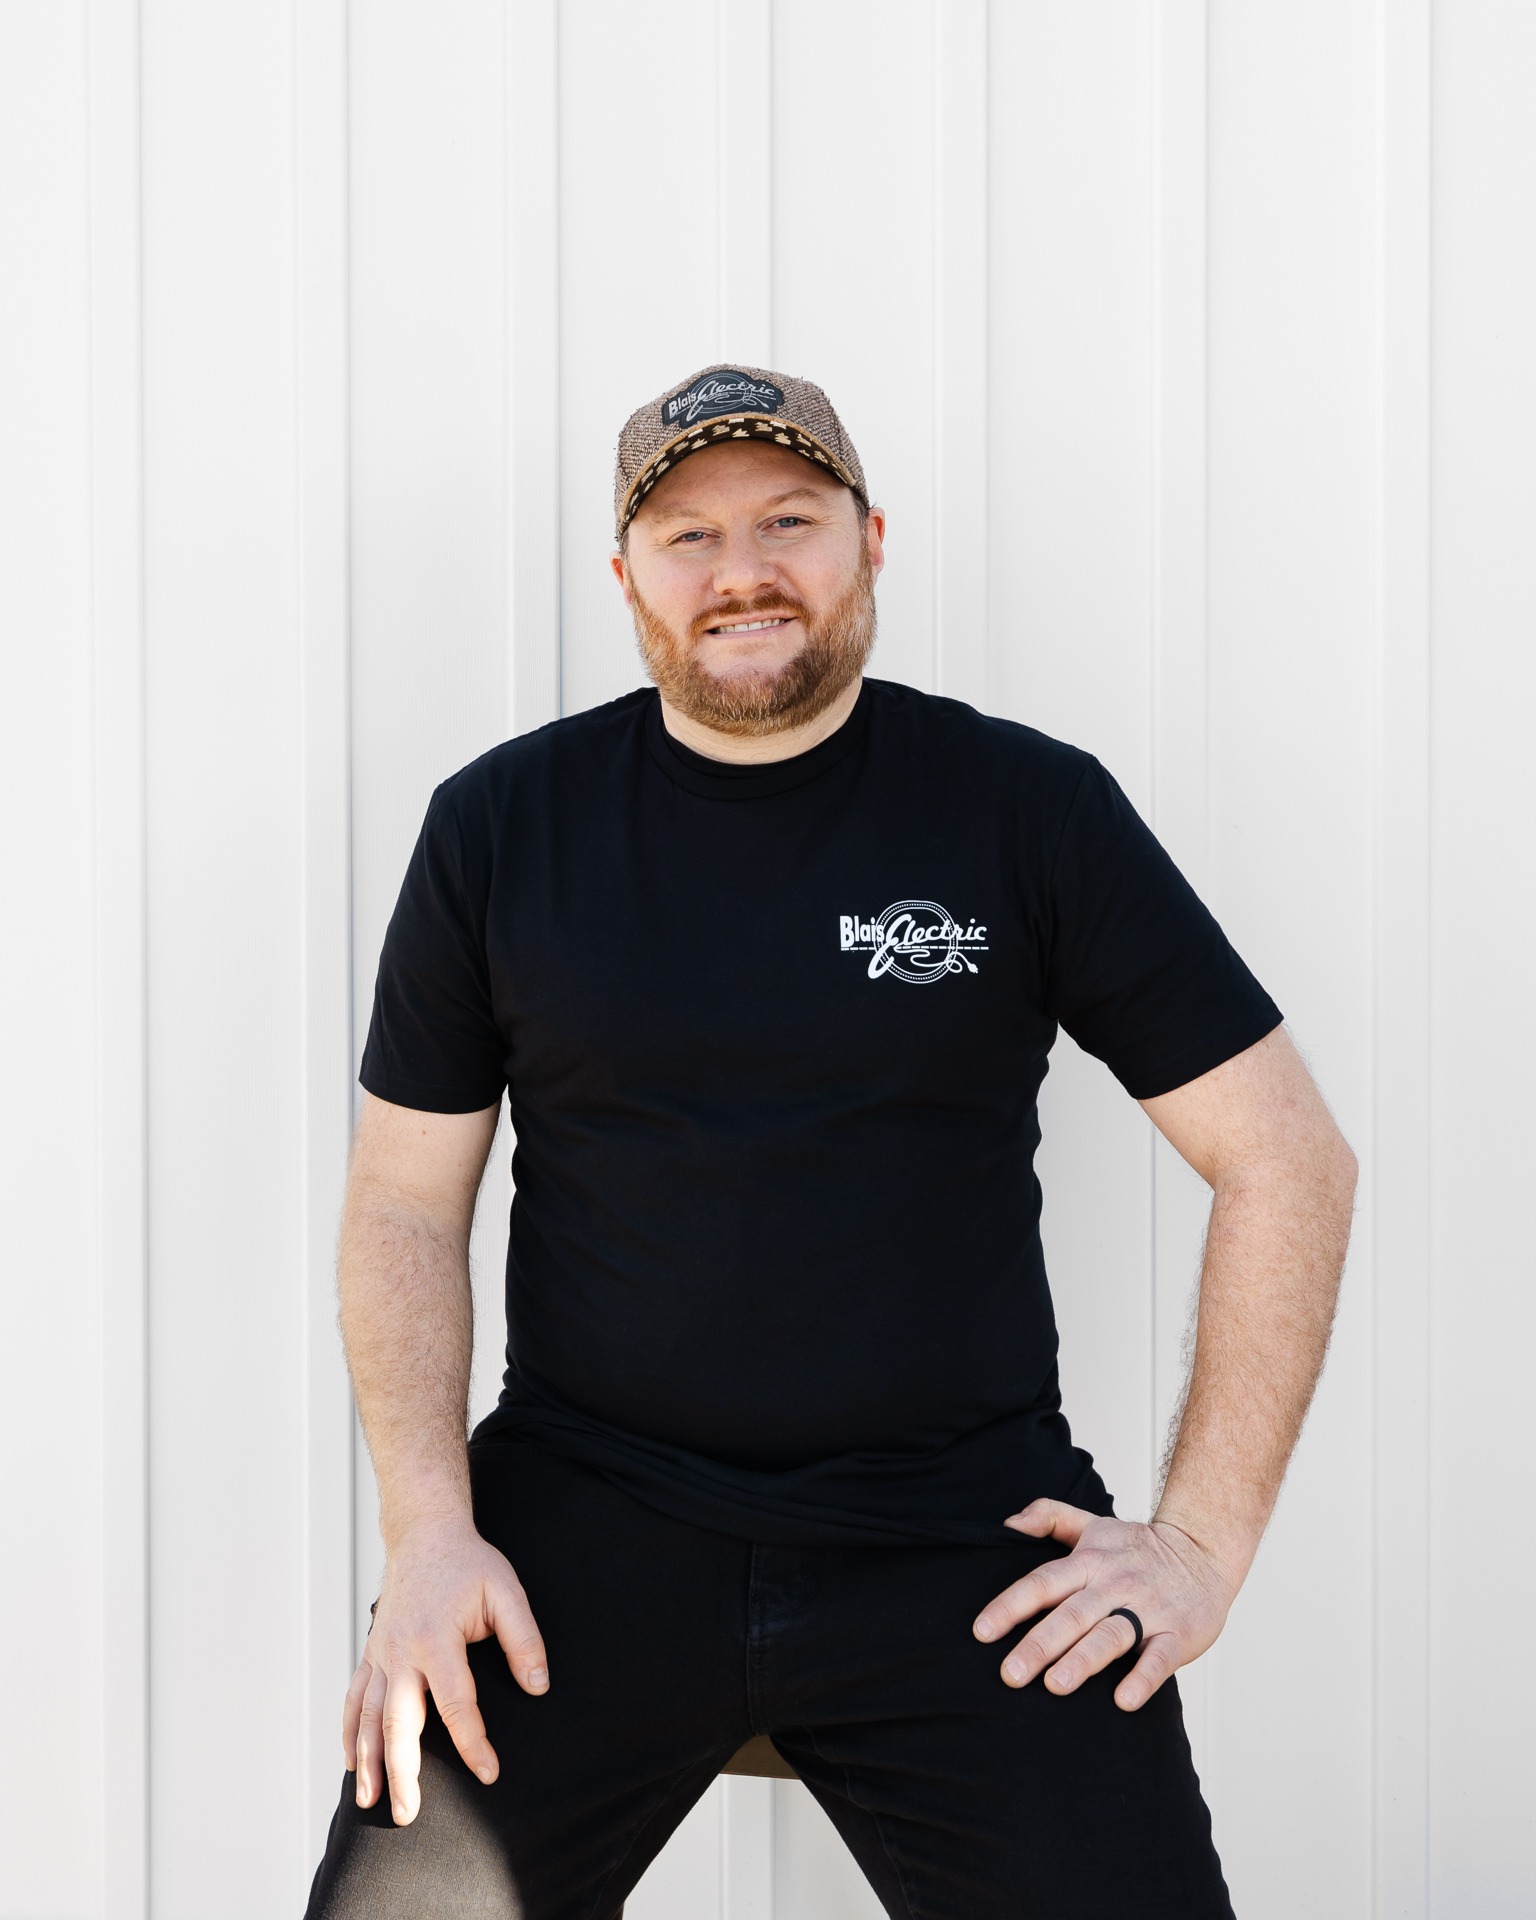 A person with a beard and cap stands confidently against a white corrugated wall, wearing a black t-shirt and pants, smiling slightly.